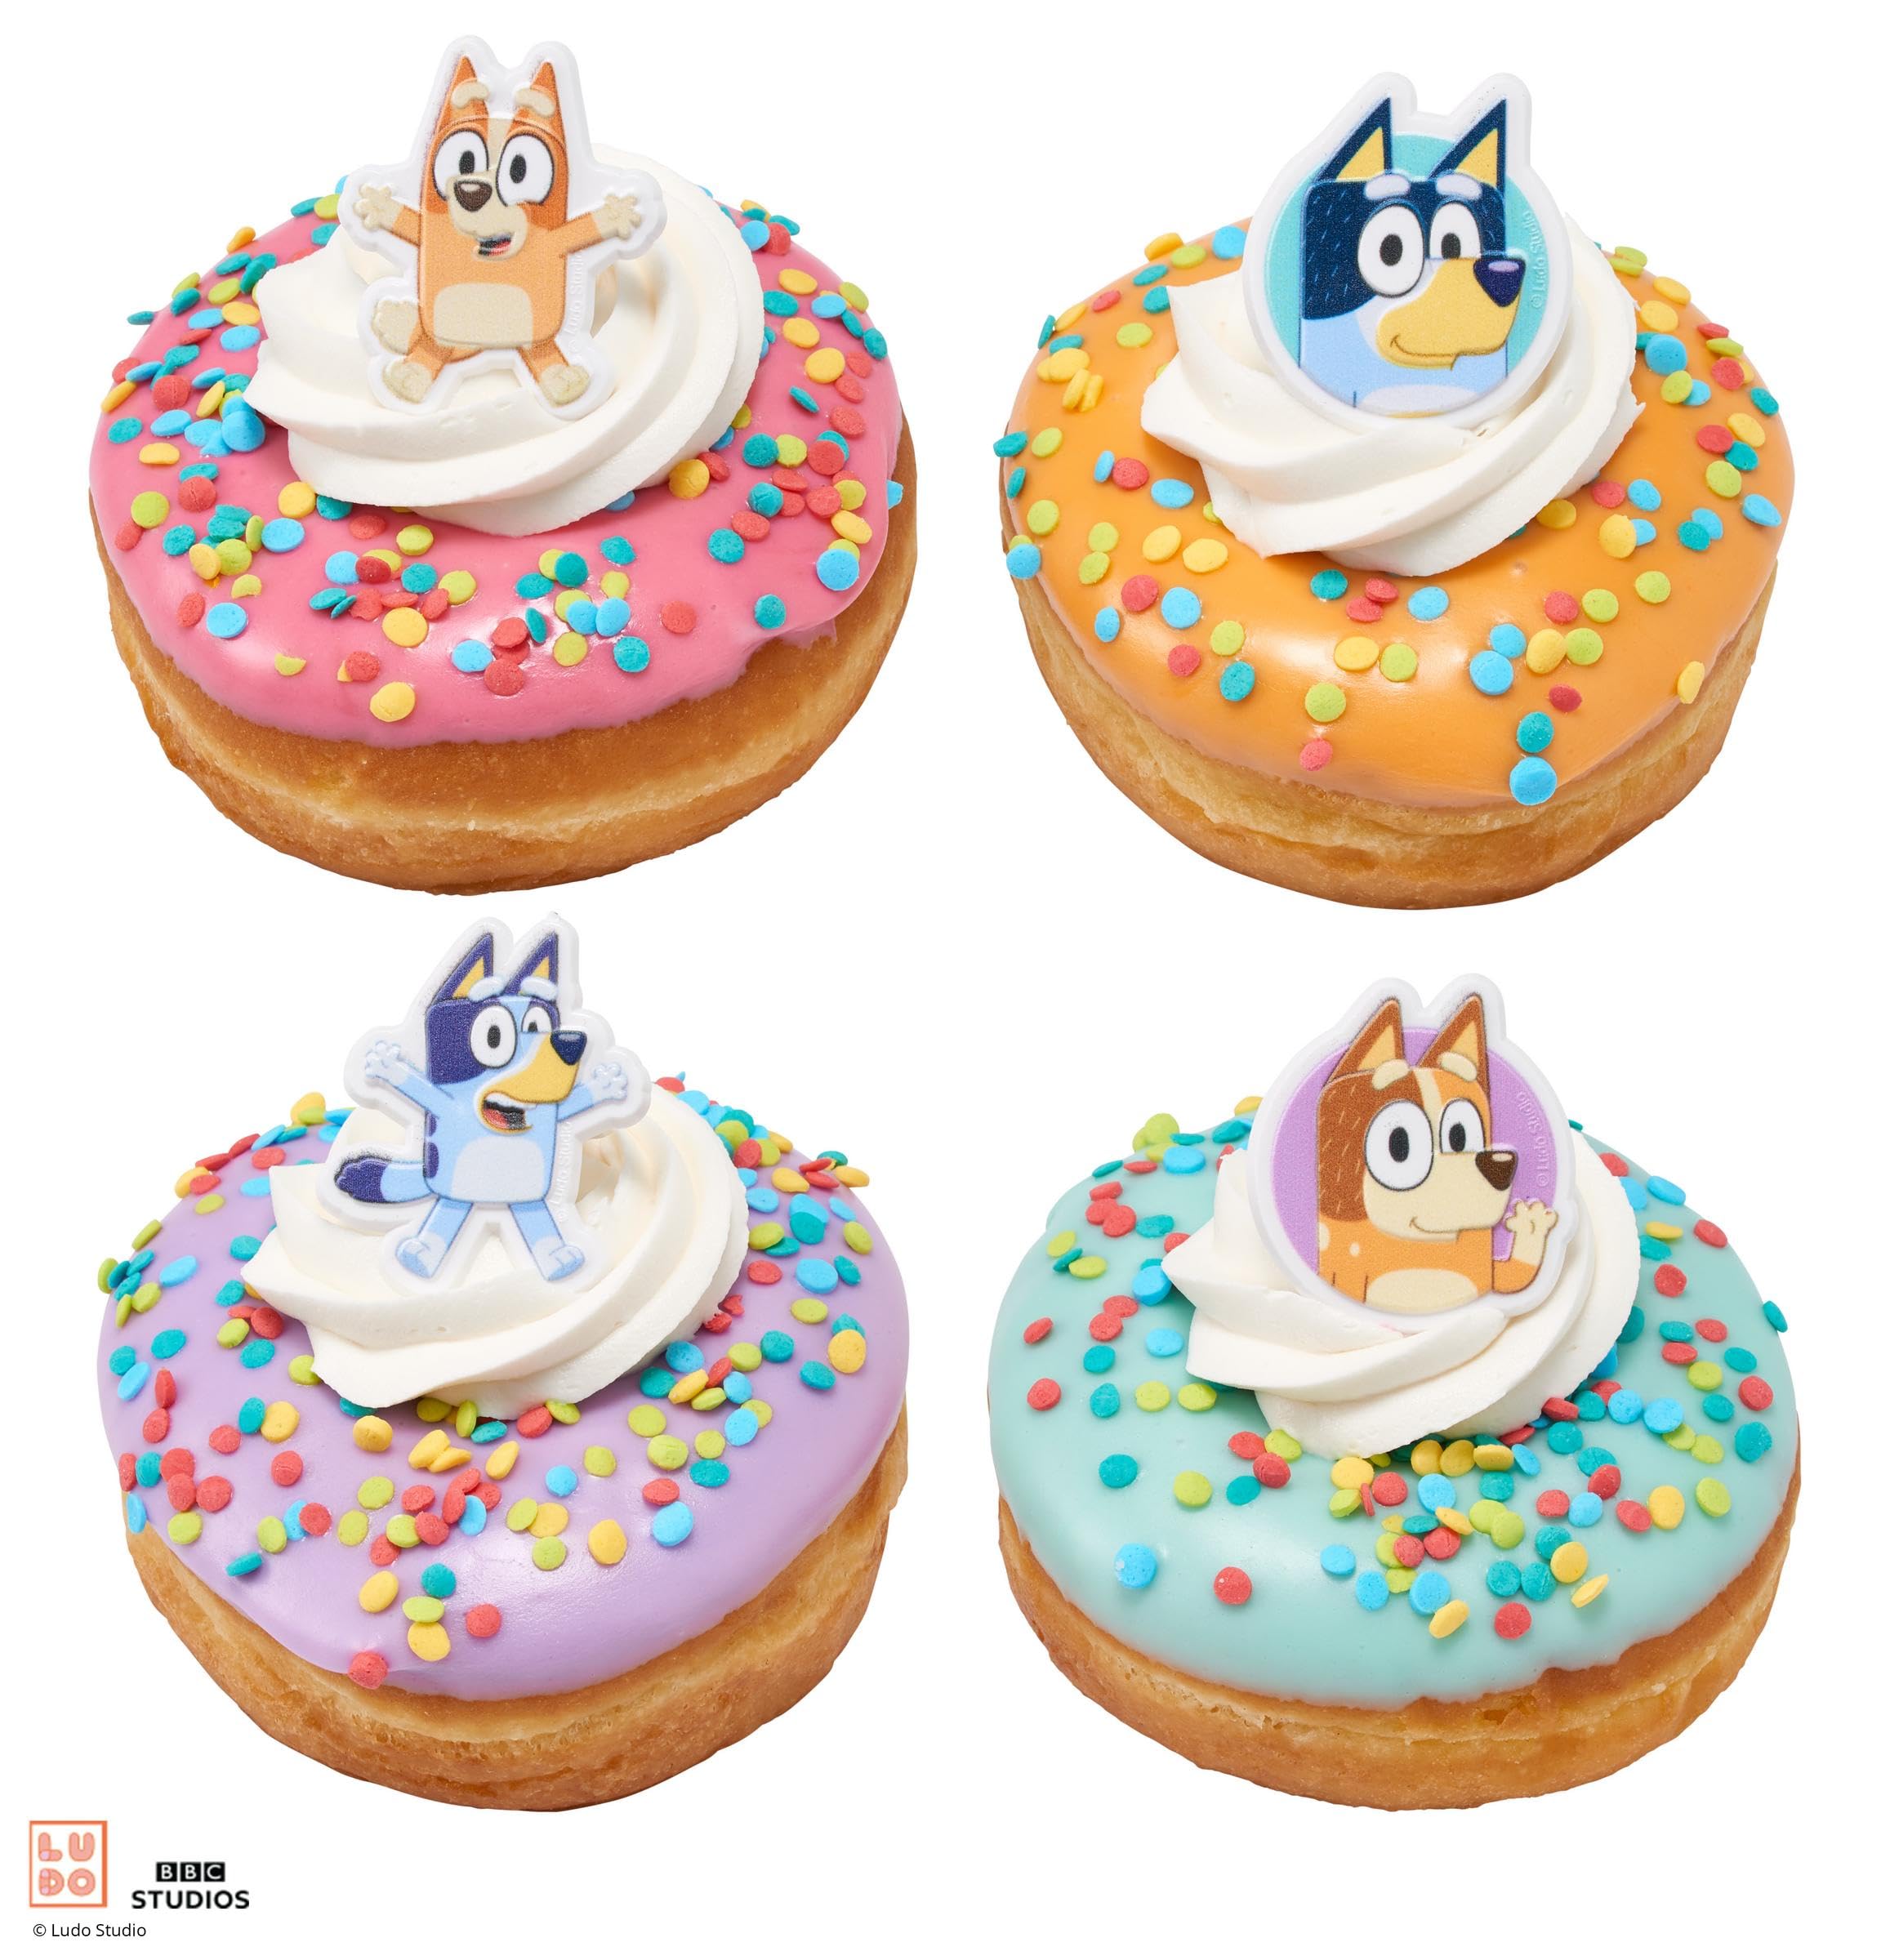 DecoPac Bluey So Much Fun Rings, Cupcake Decorations Featuring Bluey, Bingo, Bandit, and Chilli, 3D Food Safe Cake Toppers – 24 Pack